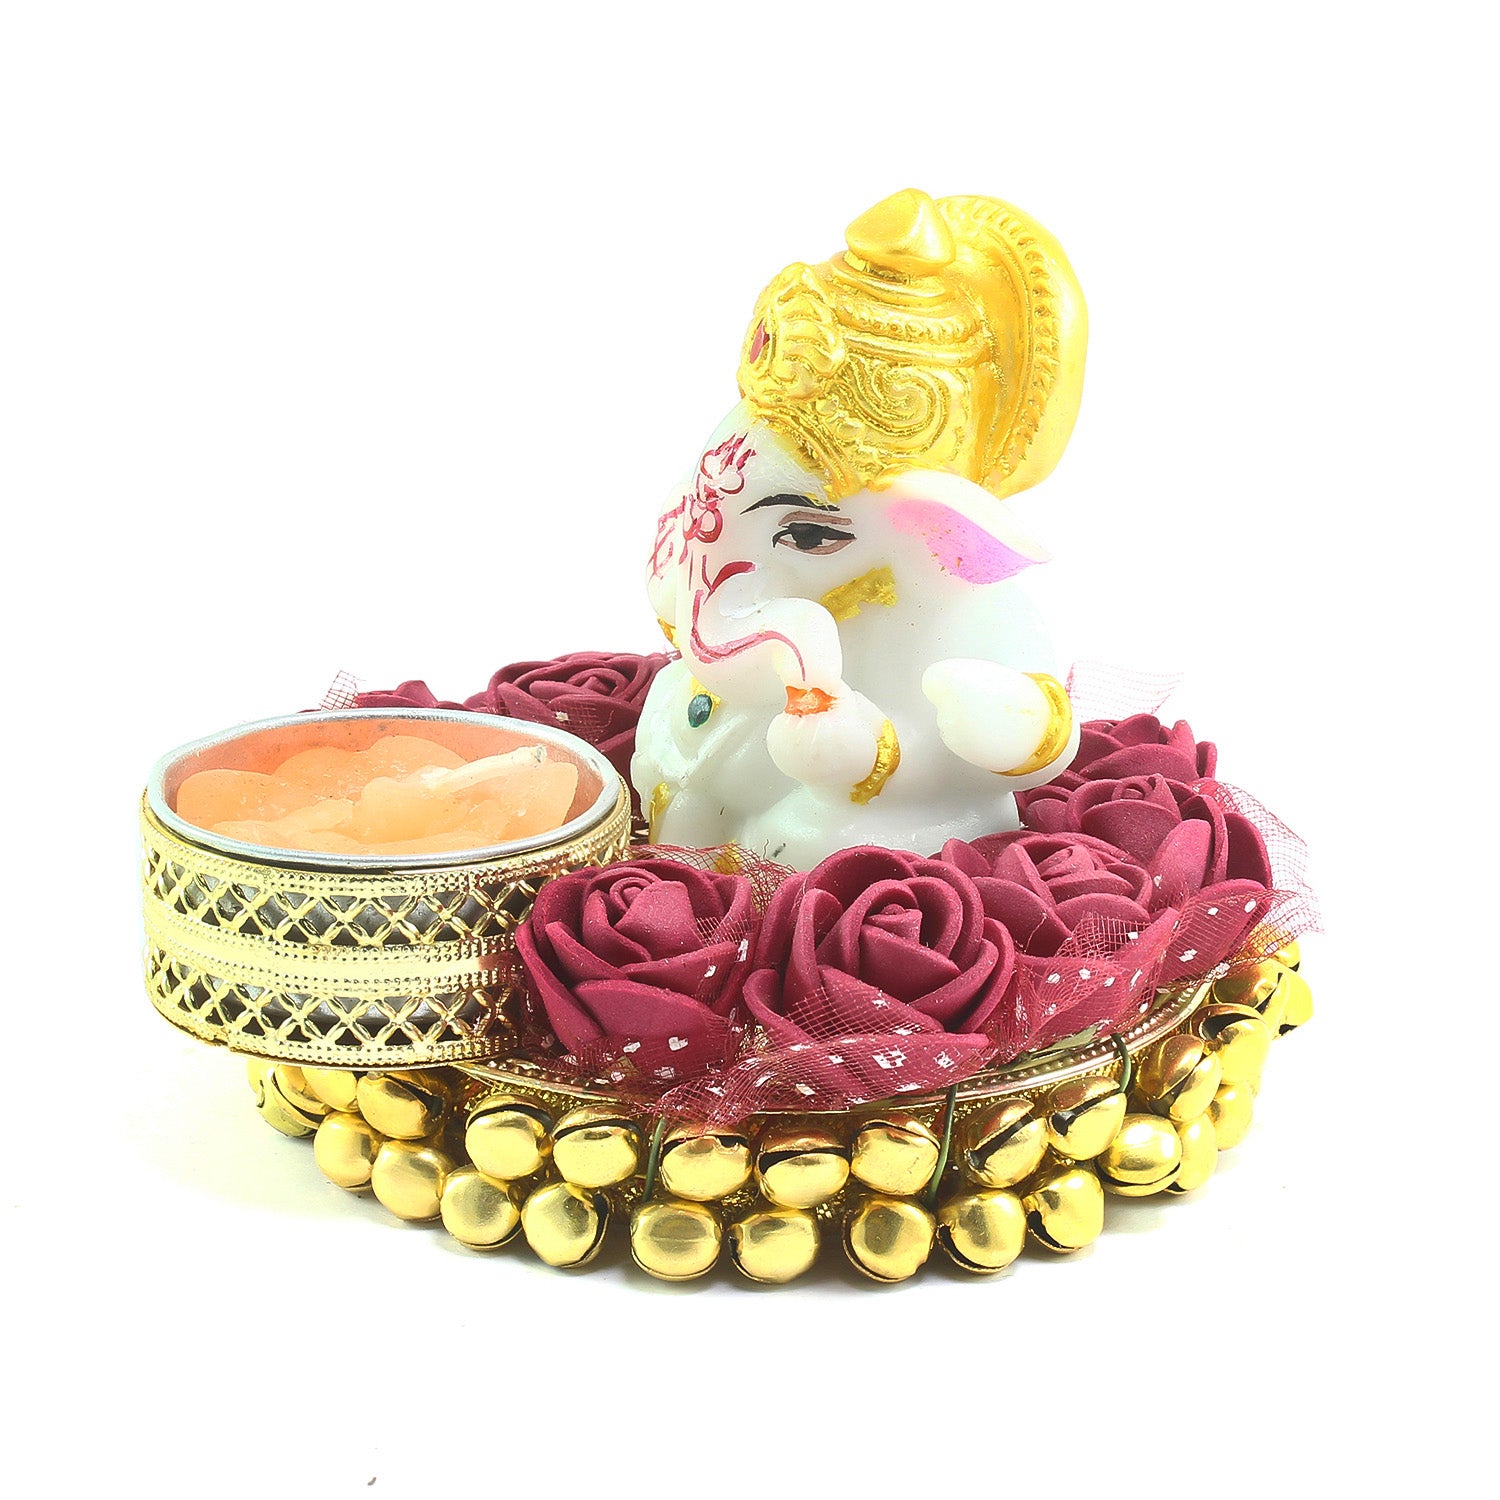 Metal and Polyresin Lord Ganesha Idol on Decorative Plate with Tea Light Candle Holder 4